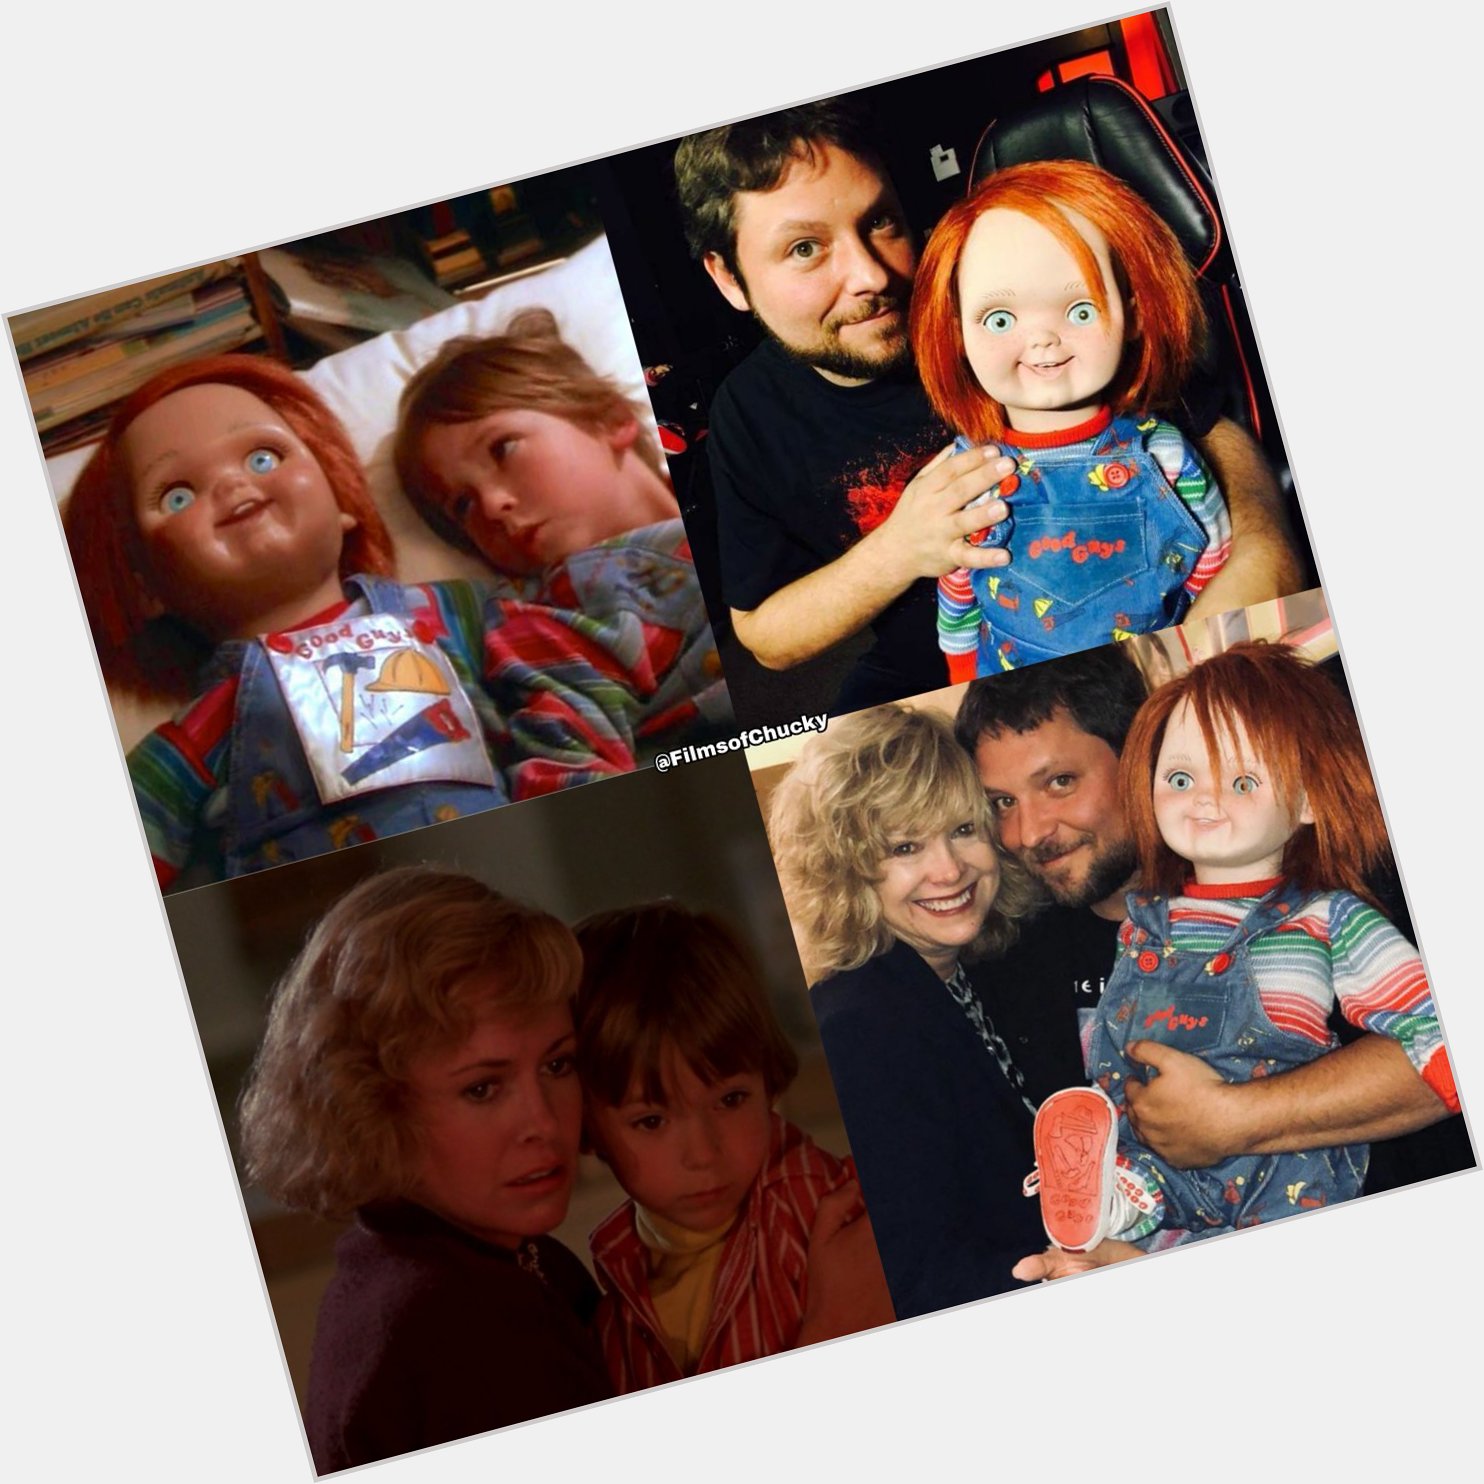 I would like to wish Alex Vincent a very happy birthday! 